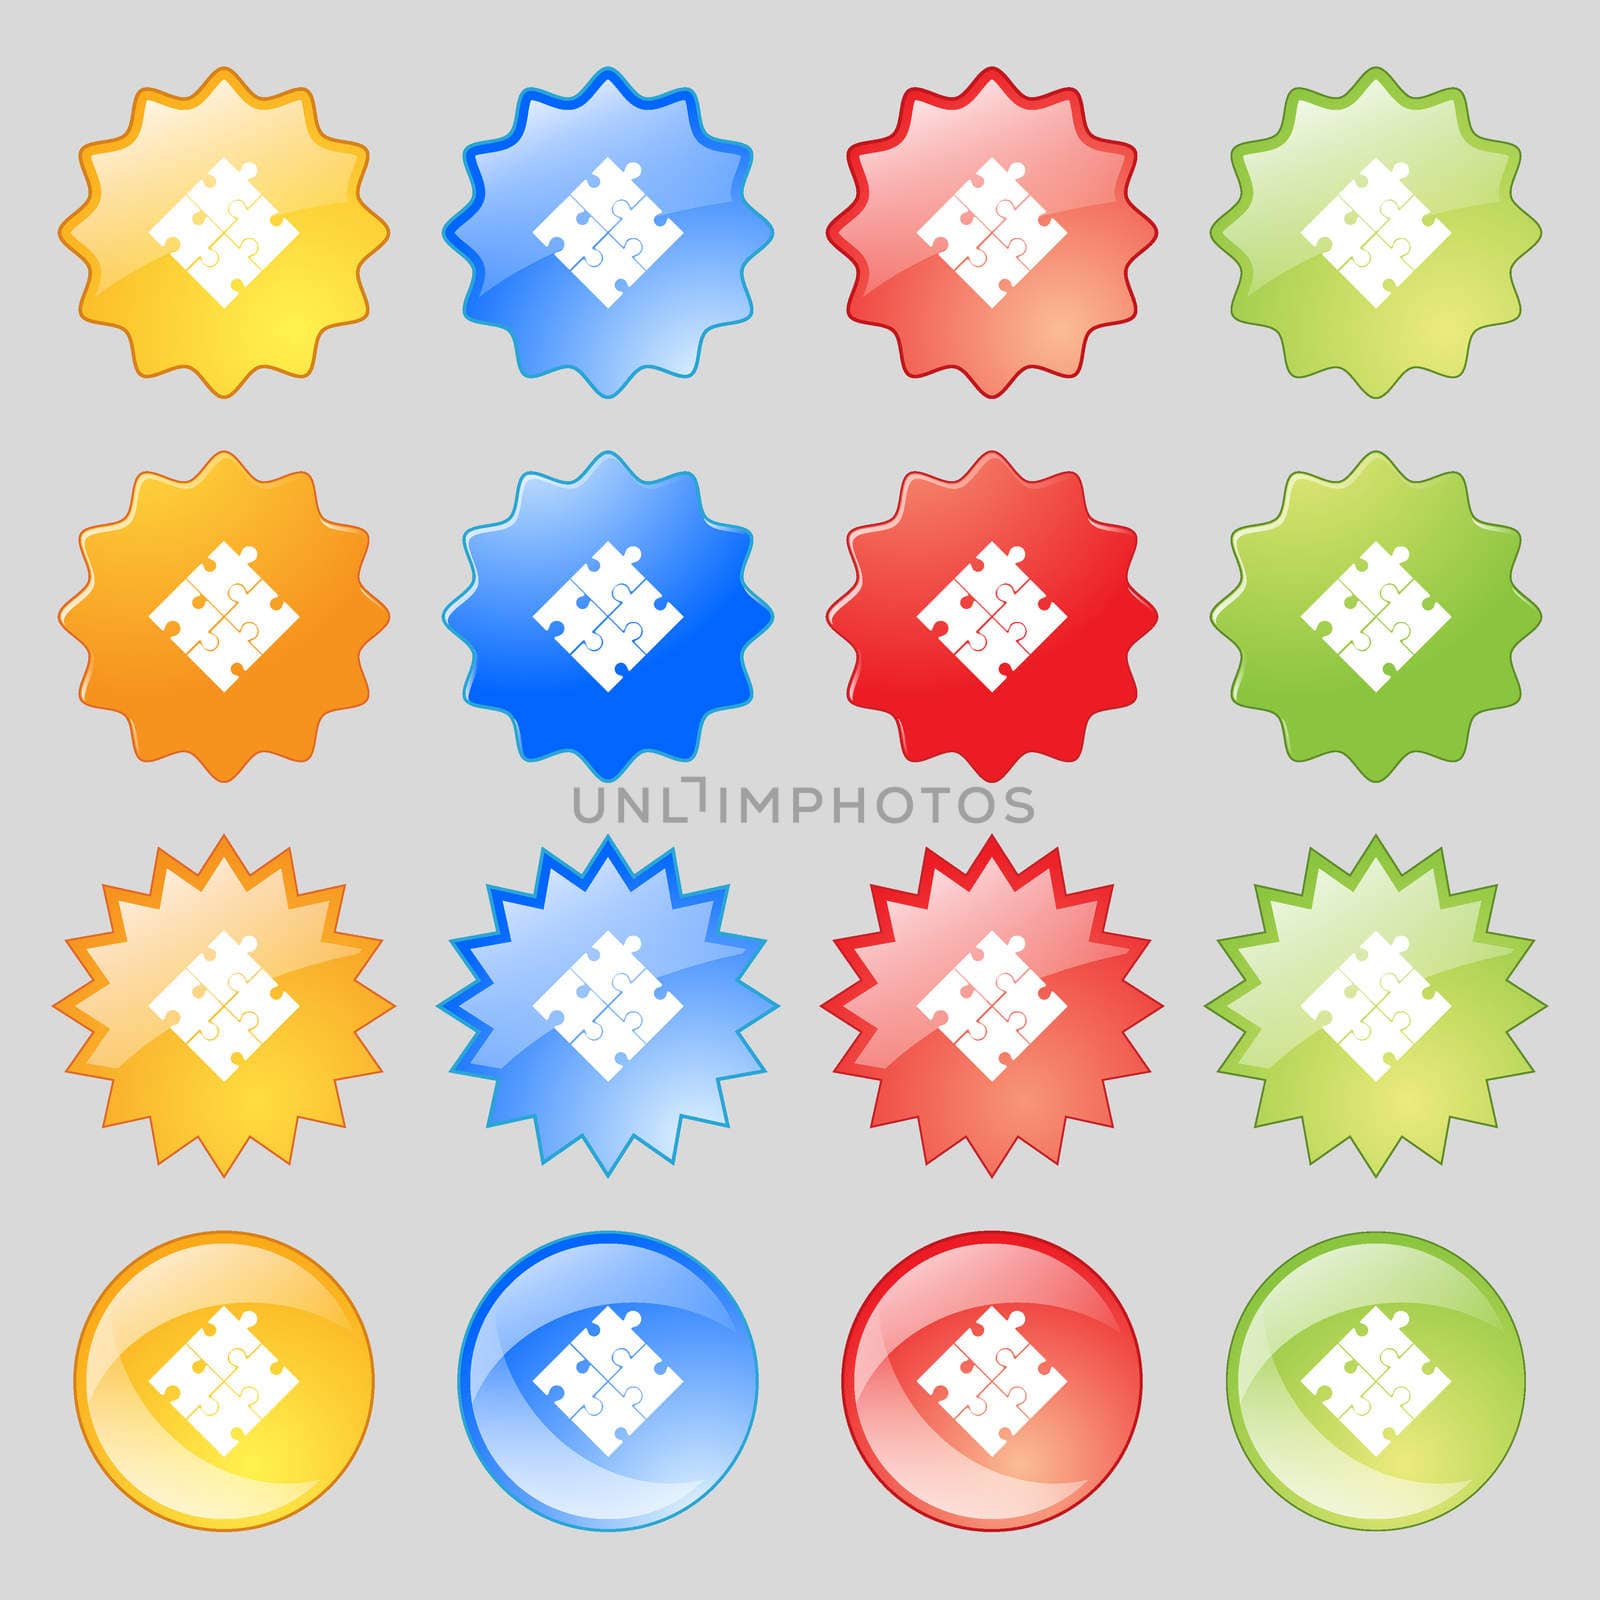 Puzzle piece icon sign. Big set of 16 colorful modern buttons for your design. illustration